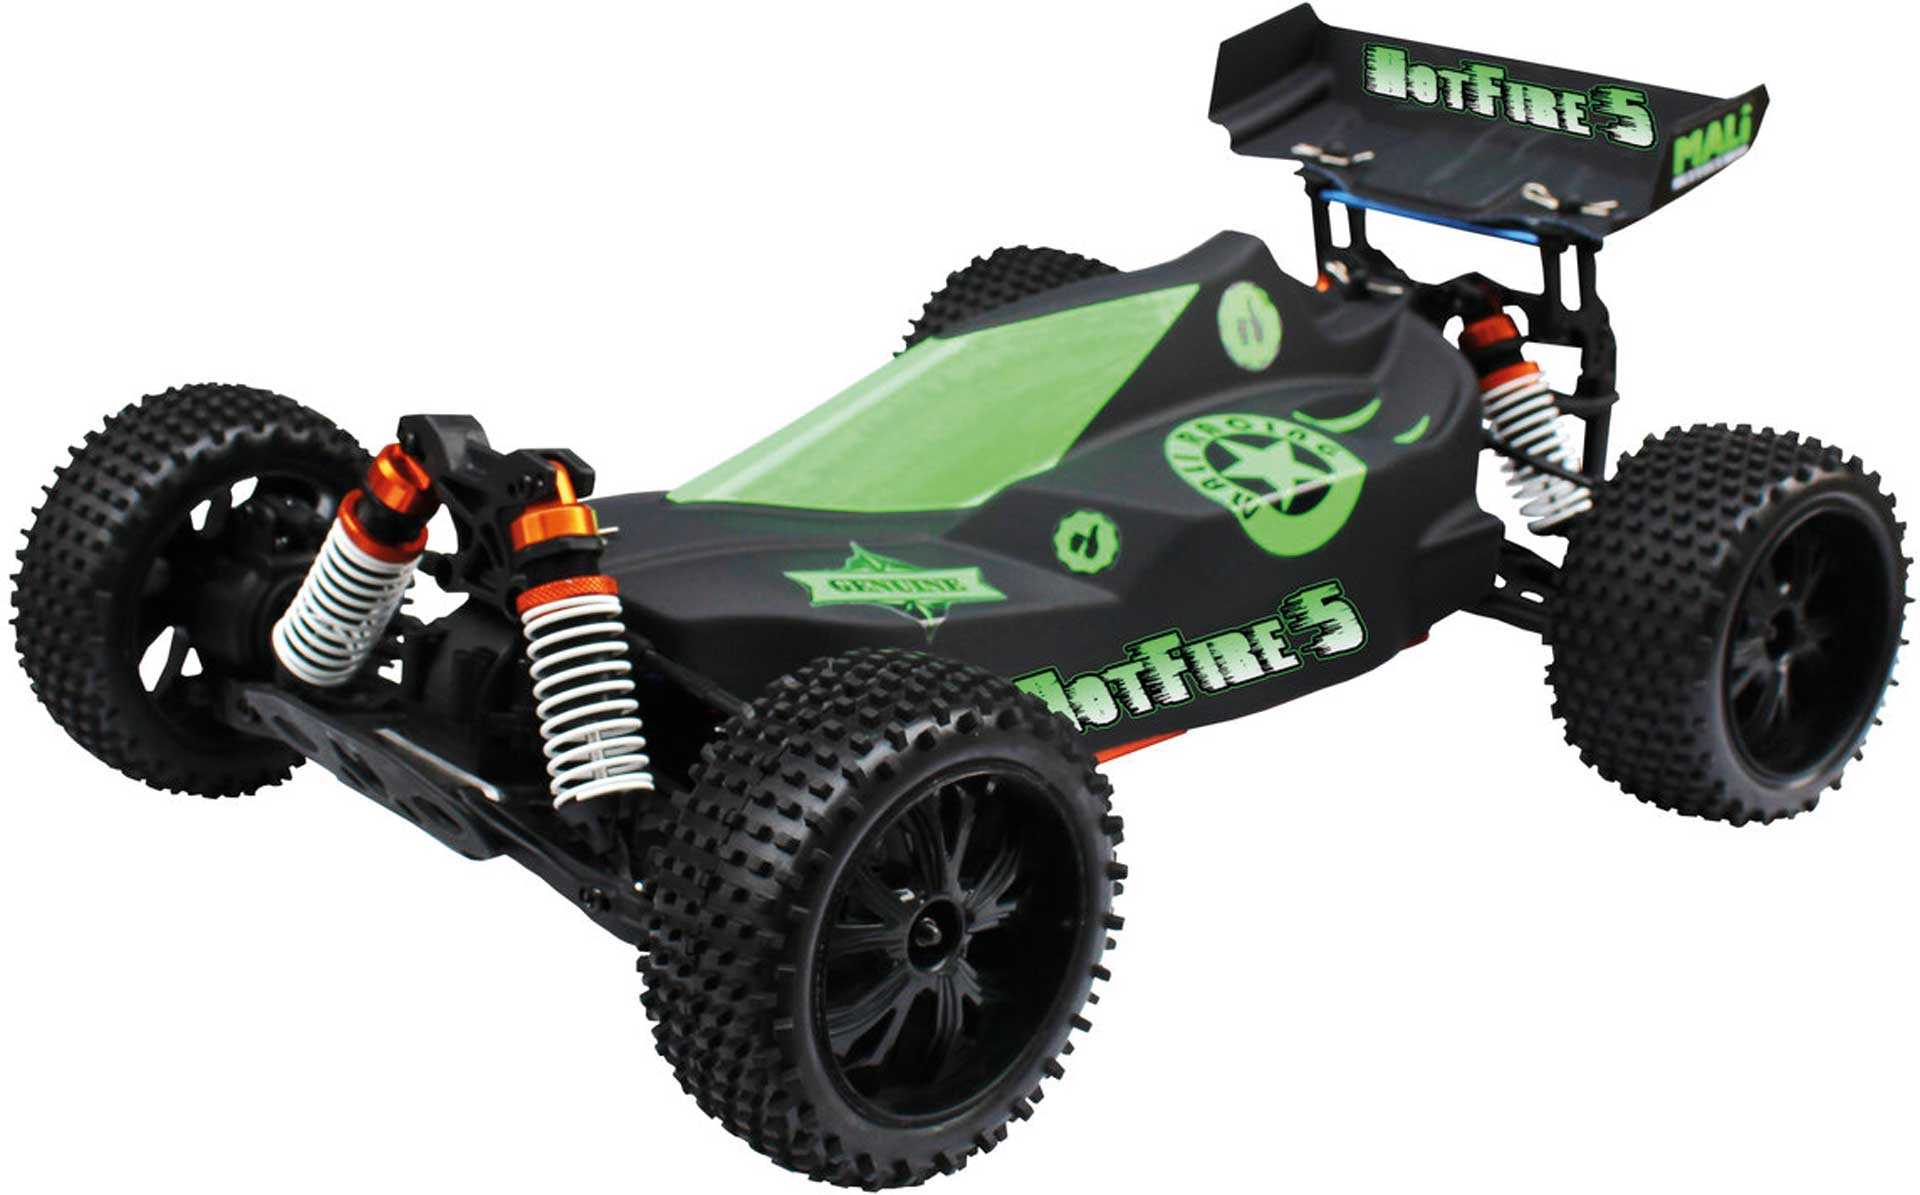 DRIVE & FLY MODELS HOTFIRE 5 BRUSHLESS BUGGY 1/10XL RTR 4WD